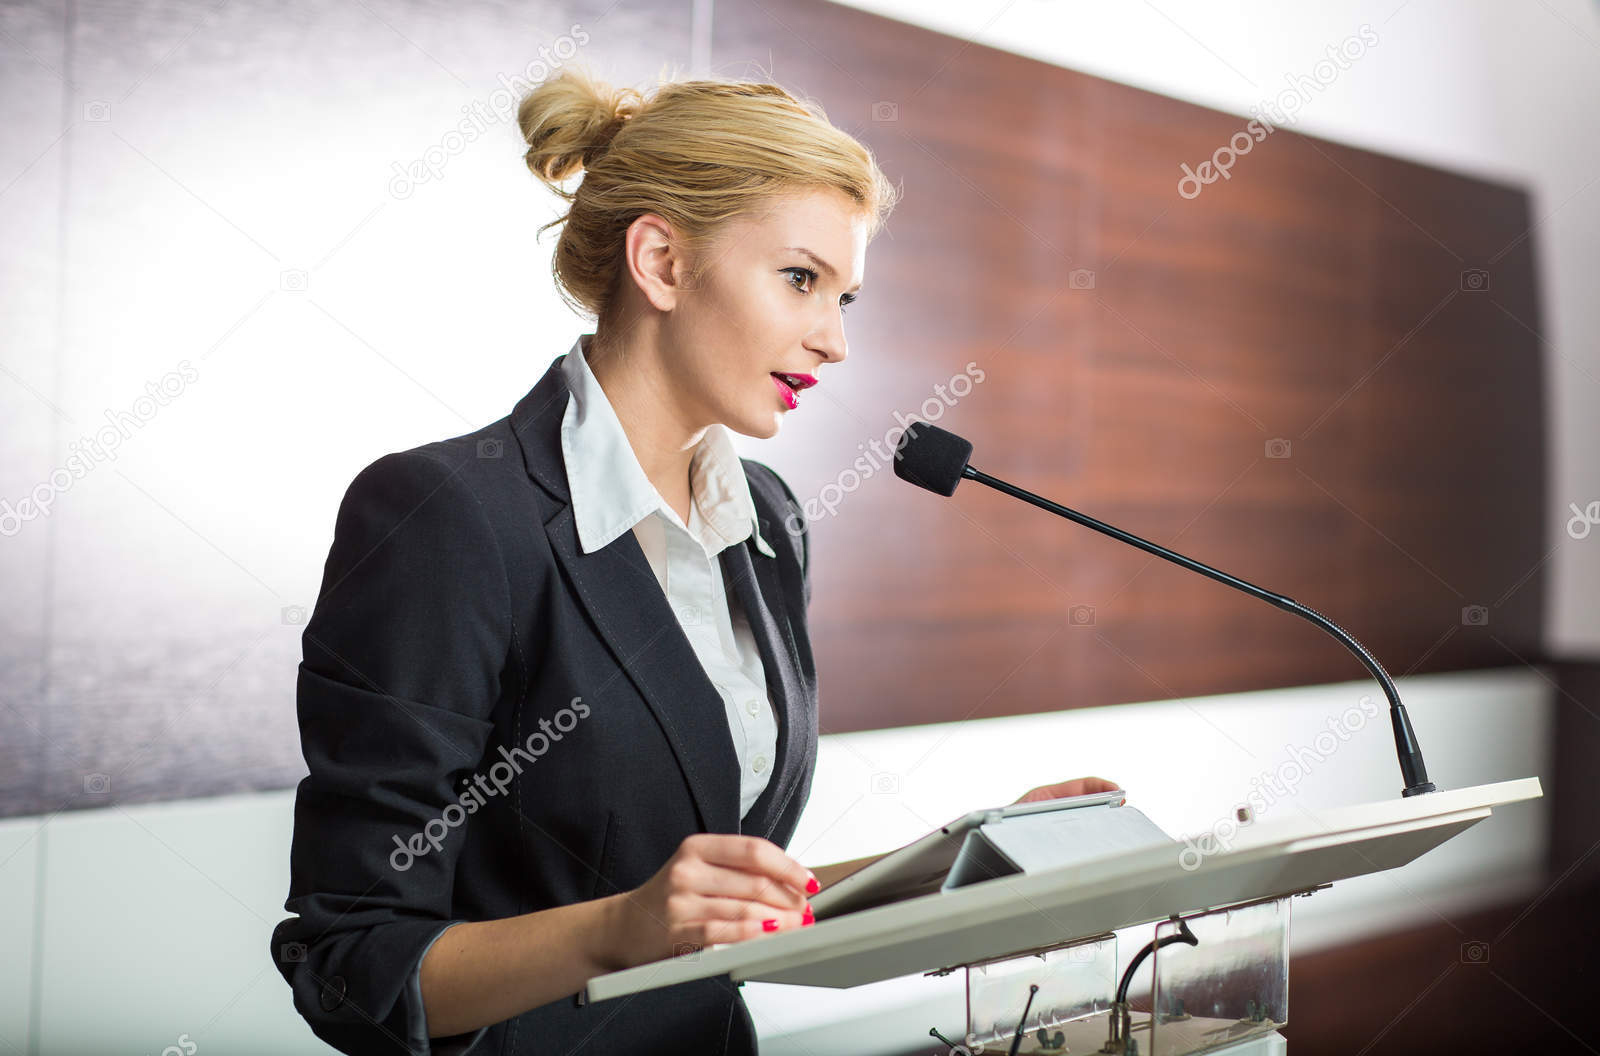 depositphotos 196983430 stock photo pretty young business woman giving